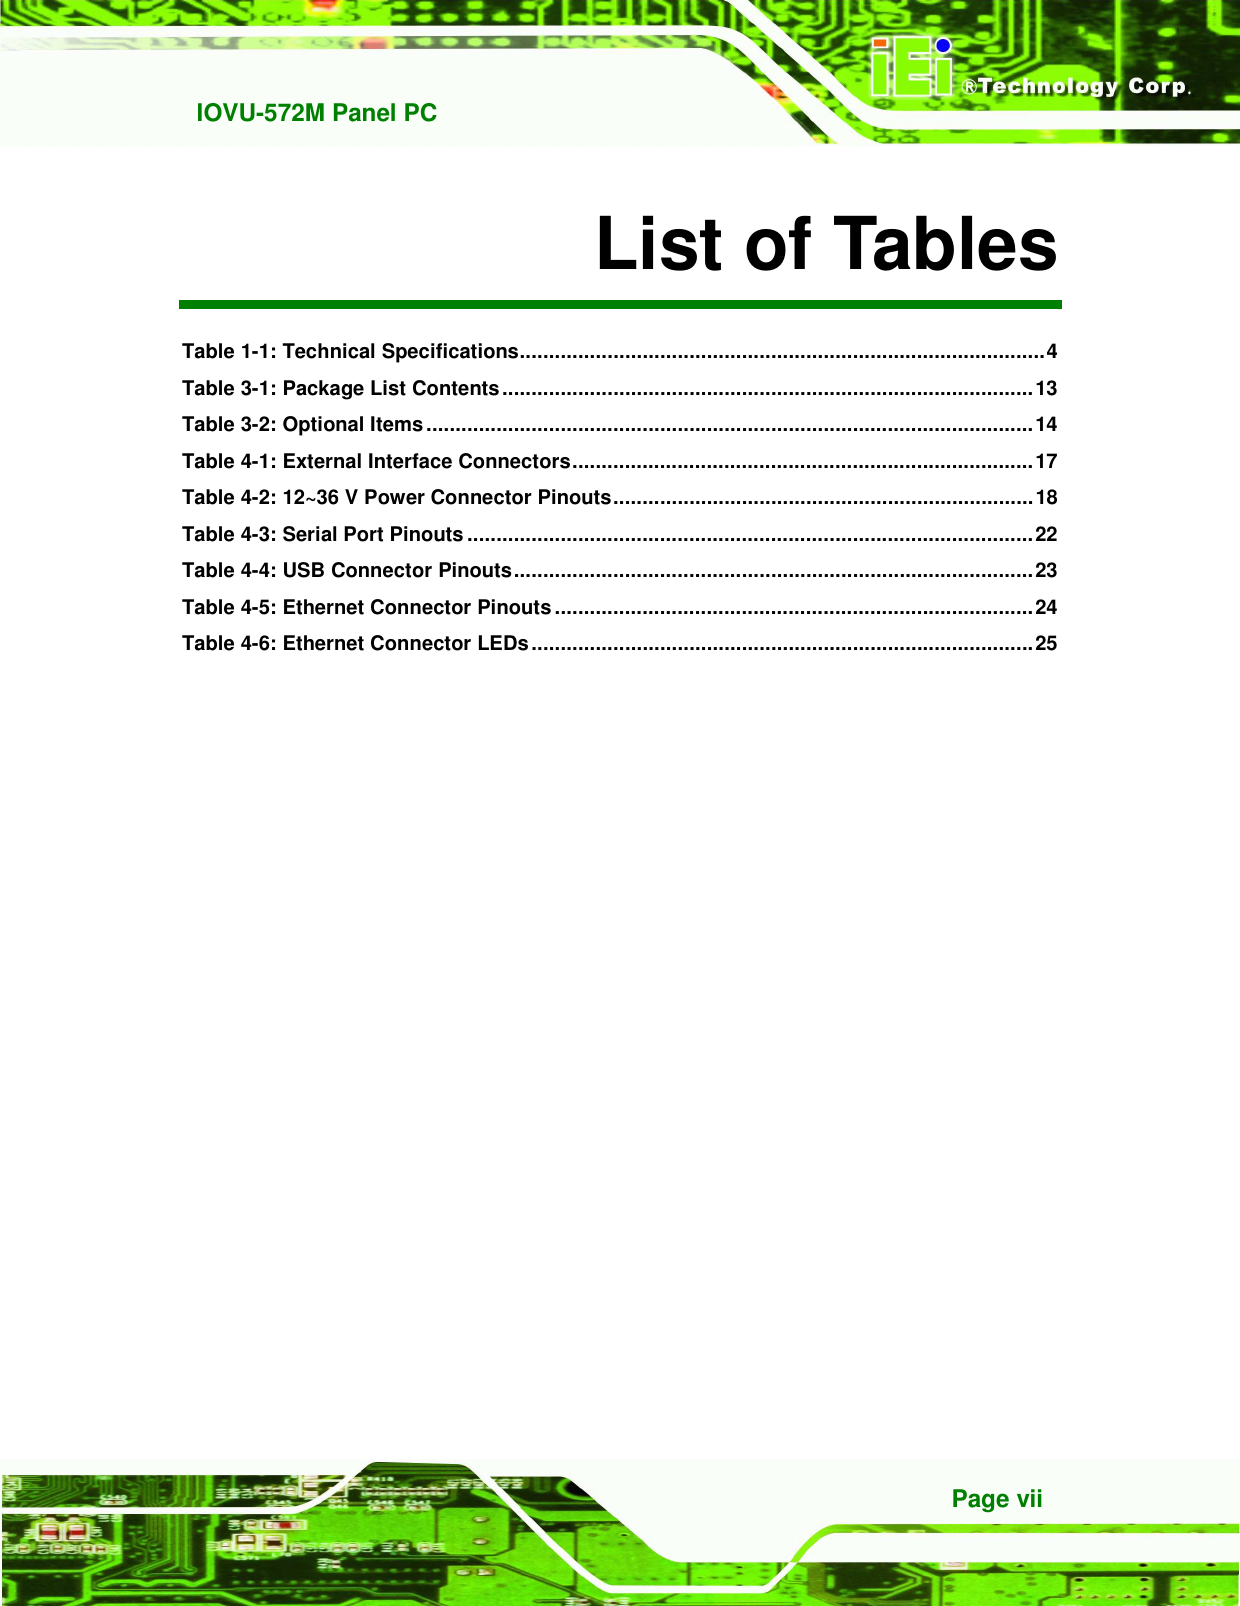   IOVU-572M Panel PC Page vii List of Tables Table 1-1: Technical Specifications .......................................................................................... 4 Table 3-1: Package List Contents ........................................................................................... 13 Table 3-2: Optional Items ........................................................................................................ 14 Table 4-1: External Interface Connectors ............................................................................... 17 Table 4-2: 12~36 V Power Connector Pinouts ........................................................................ 18 Table 4-3: Serial Port Pinouts ................................................................................................. 22 Table 4-4: USB Connector Pinouts ......................................................................................... 23 Table 4-5: Ethernet Connector Pinouts .................................................................................. 24 Table 4-6: Ethernet Connector LEDs ...................................................................................... 25 